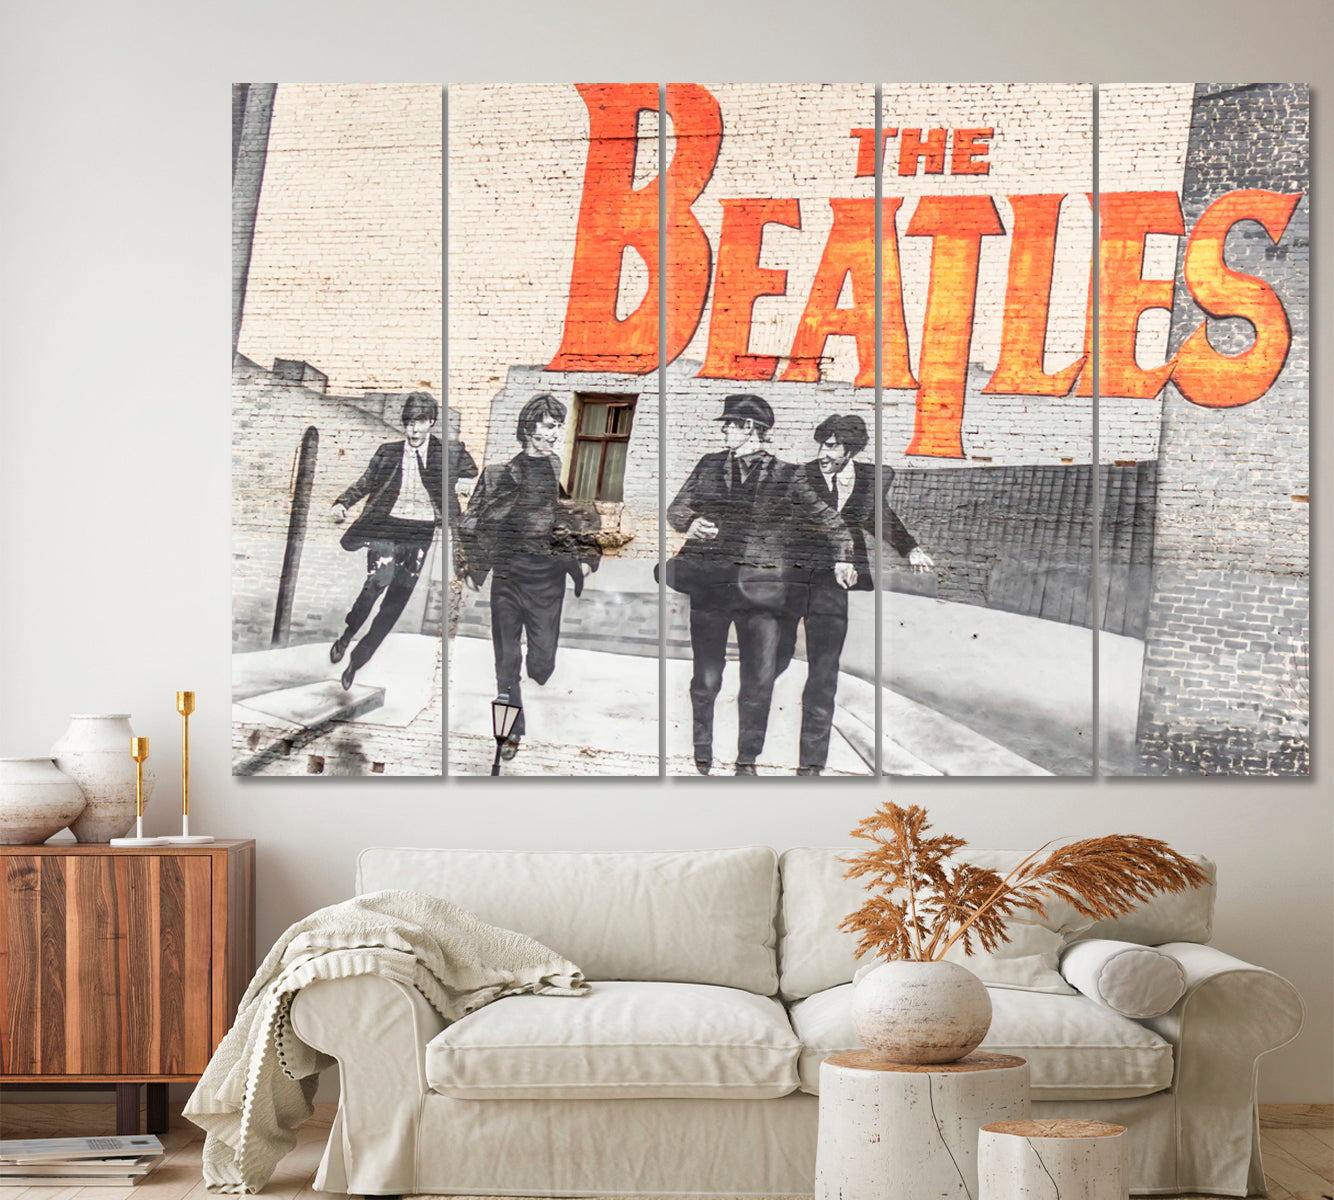 THE BEATLES GREATEST BAND EVER Iconic English Rock Band Inspired Graffiti Celebs Canvas Print Artesty 5 panels 36" x 24" 